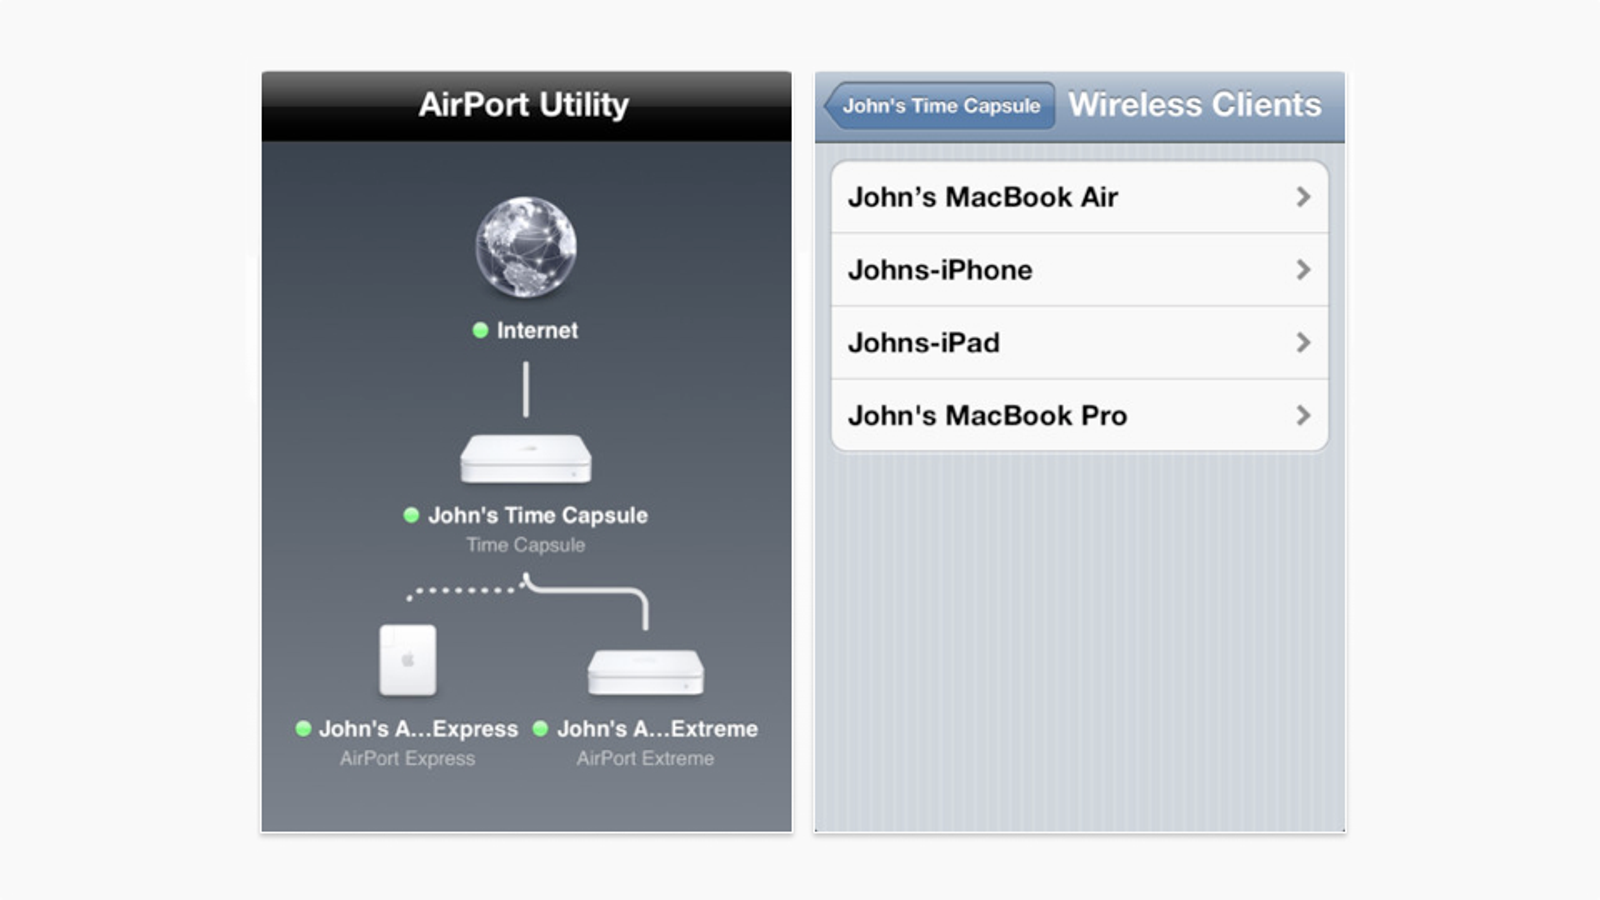 airport utility cannot find airport